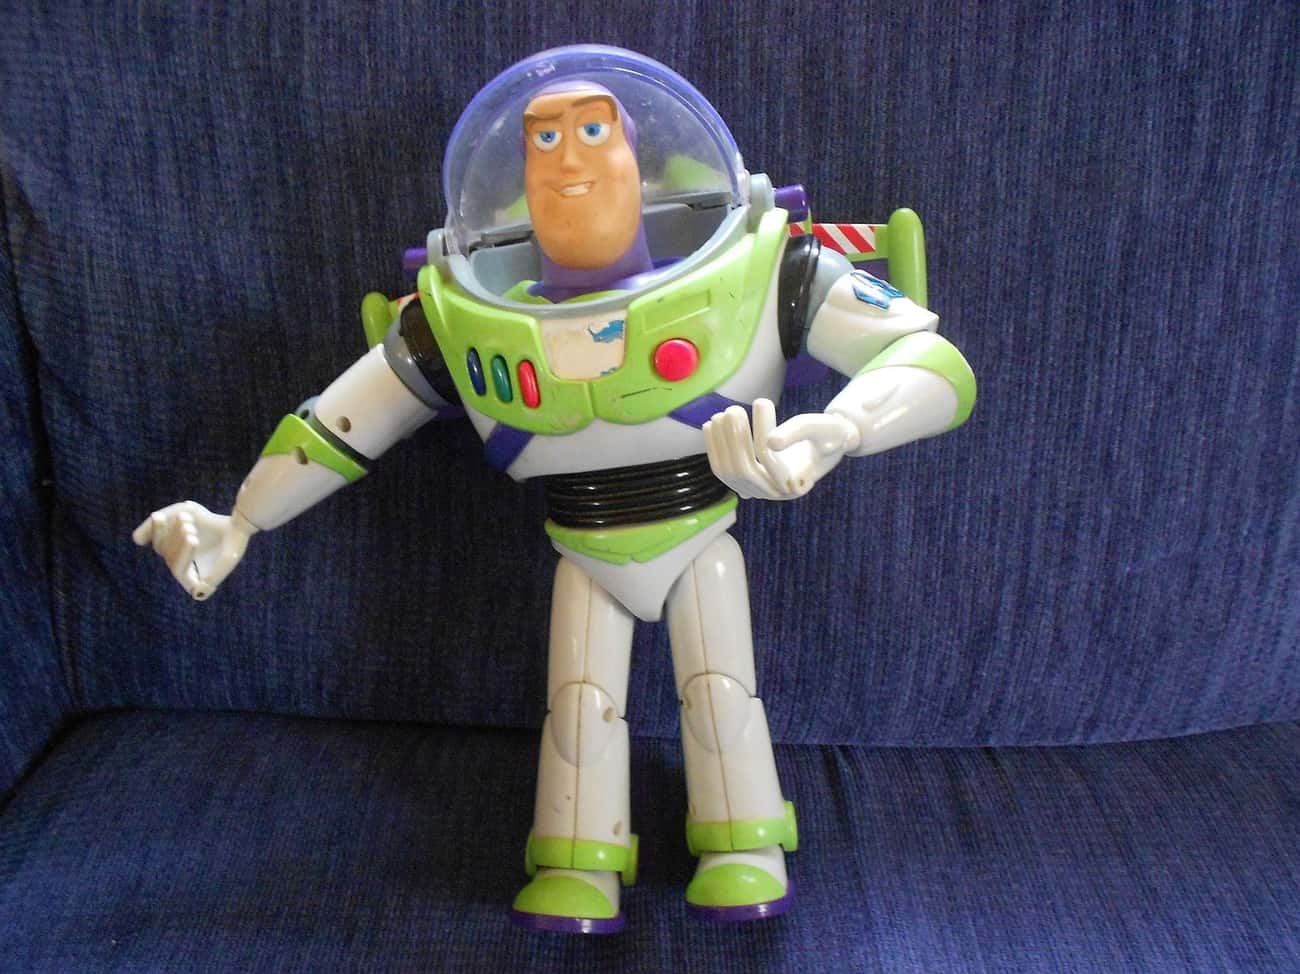 &#34;Infinity and Beyond!&#34; Was There from the Beginning - the Name Buzz Lightyear Was Not